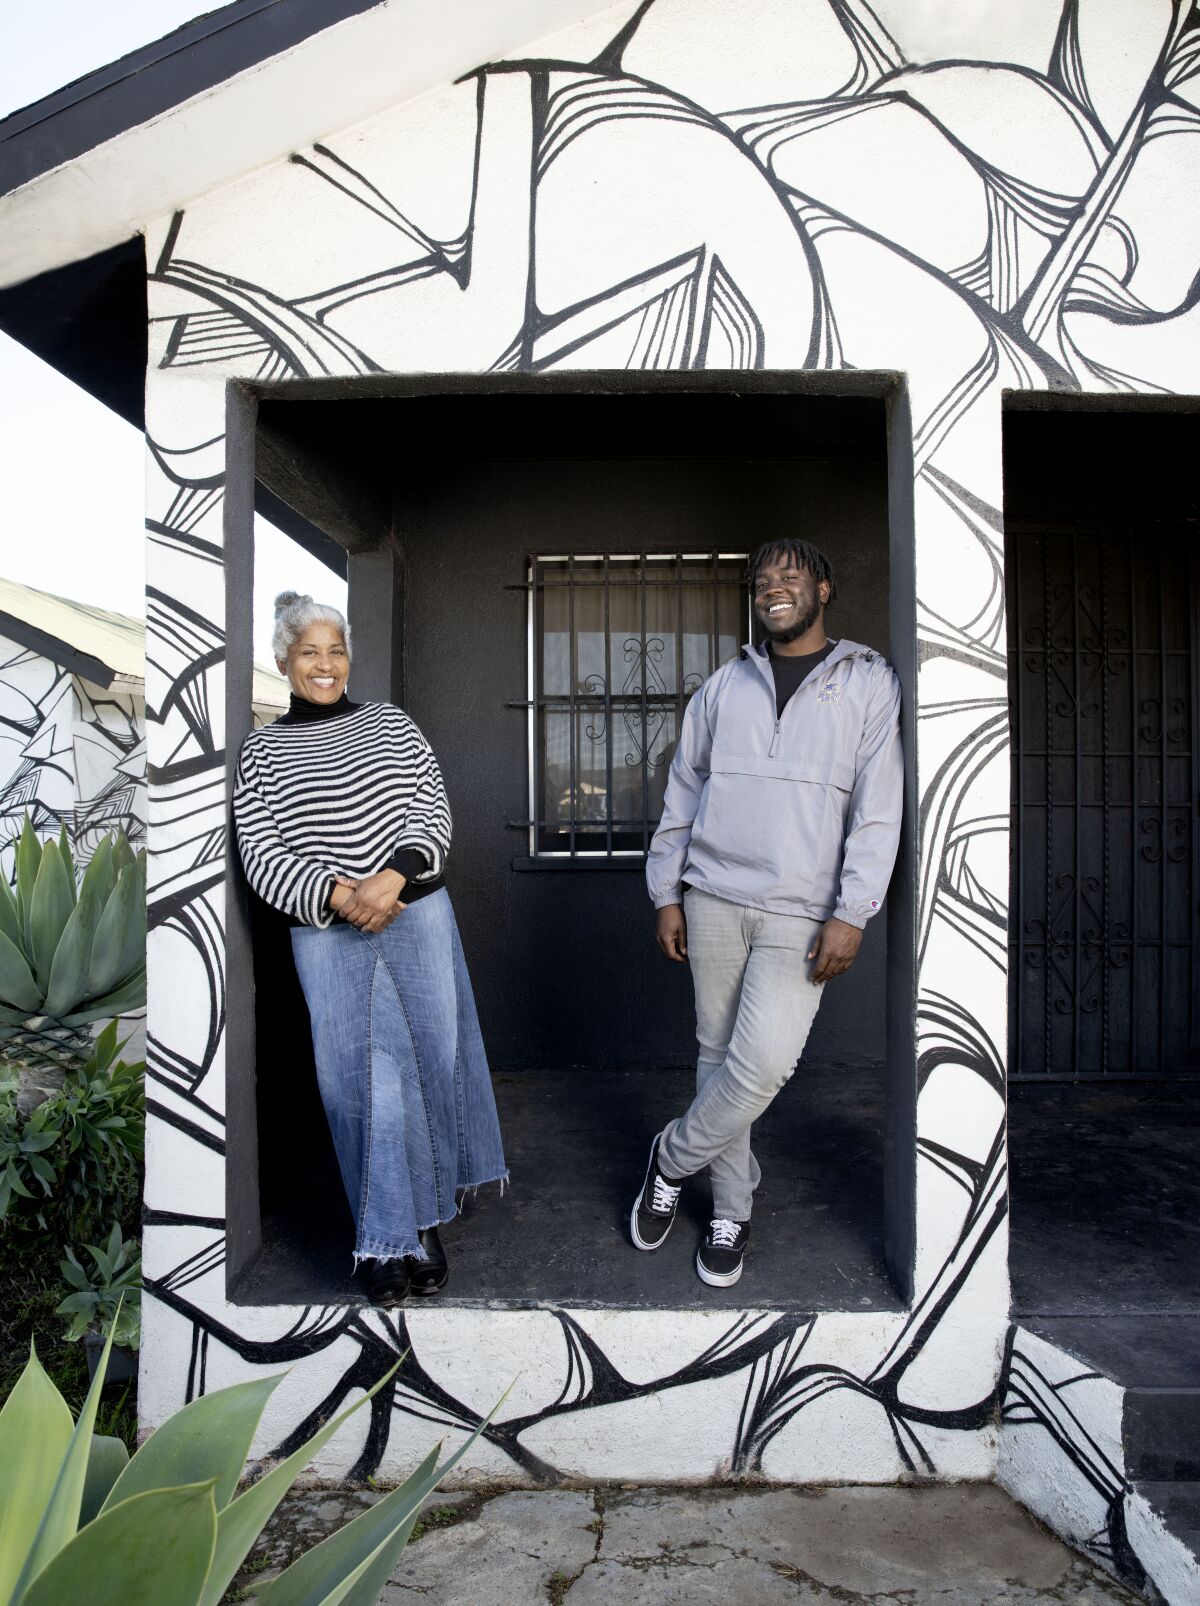 Janine Watkins and Demar Matthews are framed by porch columns in a house painted with a swirling black and white design.